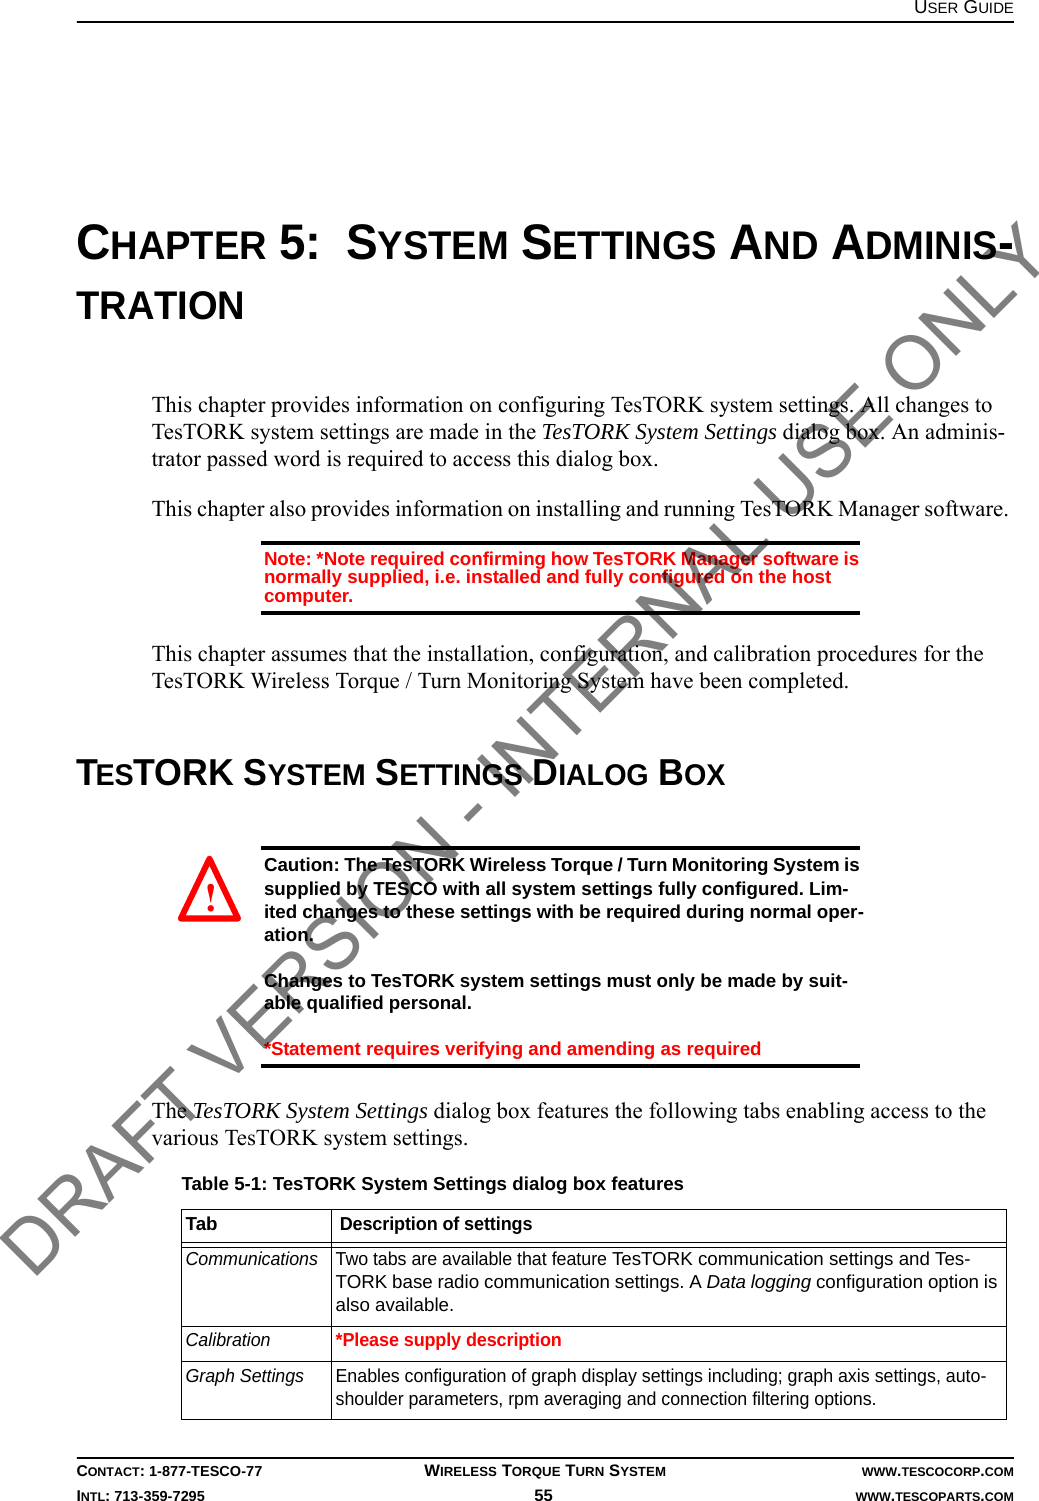 USER GUIDECONTACT: 1-877-TESCO-77 WIRELESS TORQUE TURN SYSTEM WWW.TESCOCORP.COMINTL: 713-359-7295 55    WWW.TESCOPARTS.COMCHAPTER 5:  SYSTEM SETTINGS AND ADMINIS-TRATIONThis chapter provides information on configuring TesTORK system settings. All changes to TesTORK system settings are made in the TesTORK System Settings dialog box. An adminis-trator passed word is required to access this dialog box.This chapter also provides information on installing and running TesTORK Manager software. Note: *Note required confirming how TesTORK Manager software is normally supplied, i.e. installed and fully configured on the host computer.This chapter assumes that the installation, configuration, and calibration procedures for the TesTORK Wireless Torque / Turn Monitoring System have been completed.TESTORK SYSTEM SETTINGS DIALOG BOXCaution: The TesTORK Wireless Torque / Turn Monitoring System is supplied by TESCO with all system settings fully configured. Lim-ited changes to these settings with be required during normal oper-ation. Changes to TesTORK system settings must only be made by suit-able qualified personal. *Statement requires verifying and amending as requiredThe TesTORK System Settings dialog box features the following tabs enabling access to the various TesTORK system settings.Table 5-1: TesTORK System Settings dialog box featuresTabDescription of settingsCommunications Two tabs are available that feature TesTORK communication settings and Tes-TORK base radio communication settings. A Data logging configuration option is also available.Calibration*Please supply descriptionGraph Settings Enables configuration of graph display settings including; graph axis settings, auto-shoulder parameters, rpm averaging and connection filtering options.! DRAFT VERSION - INTERNAL USE ONLY